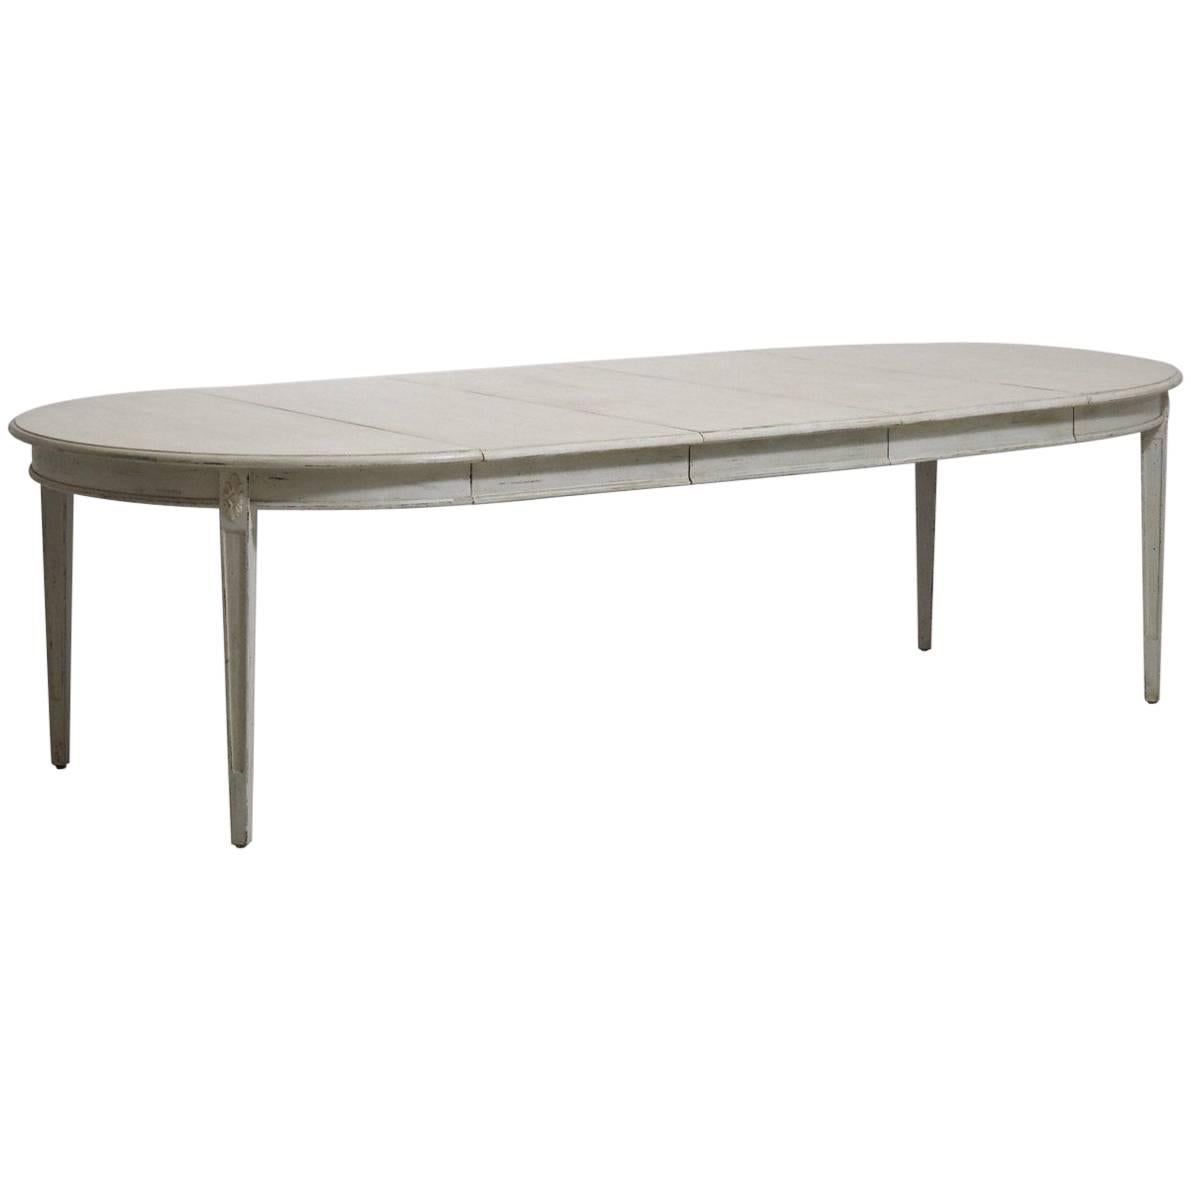 Swedish Gustavian Style Three-Leaf Extension Dining Table